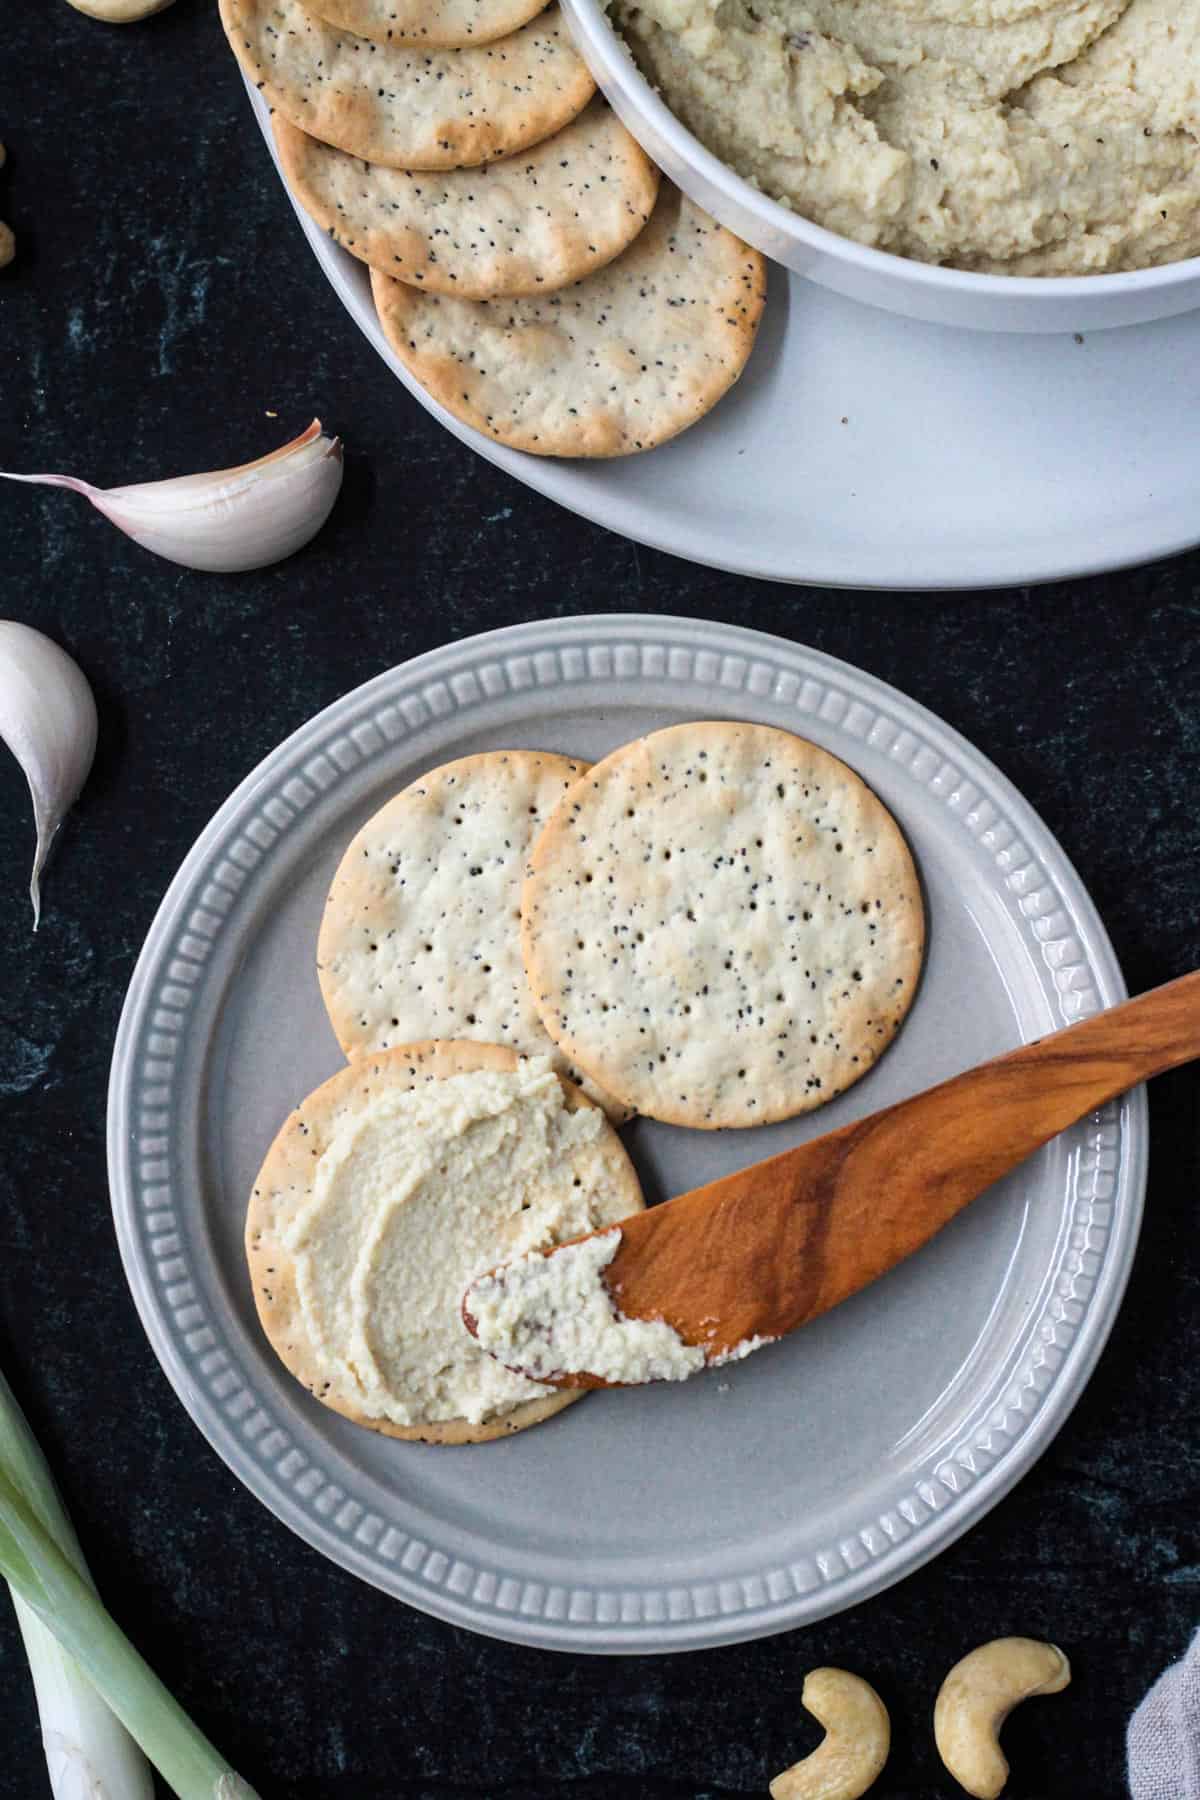 Ricotta spread on one cracker next to two plain crackers.